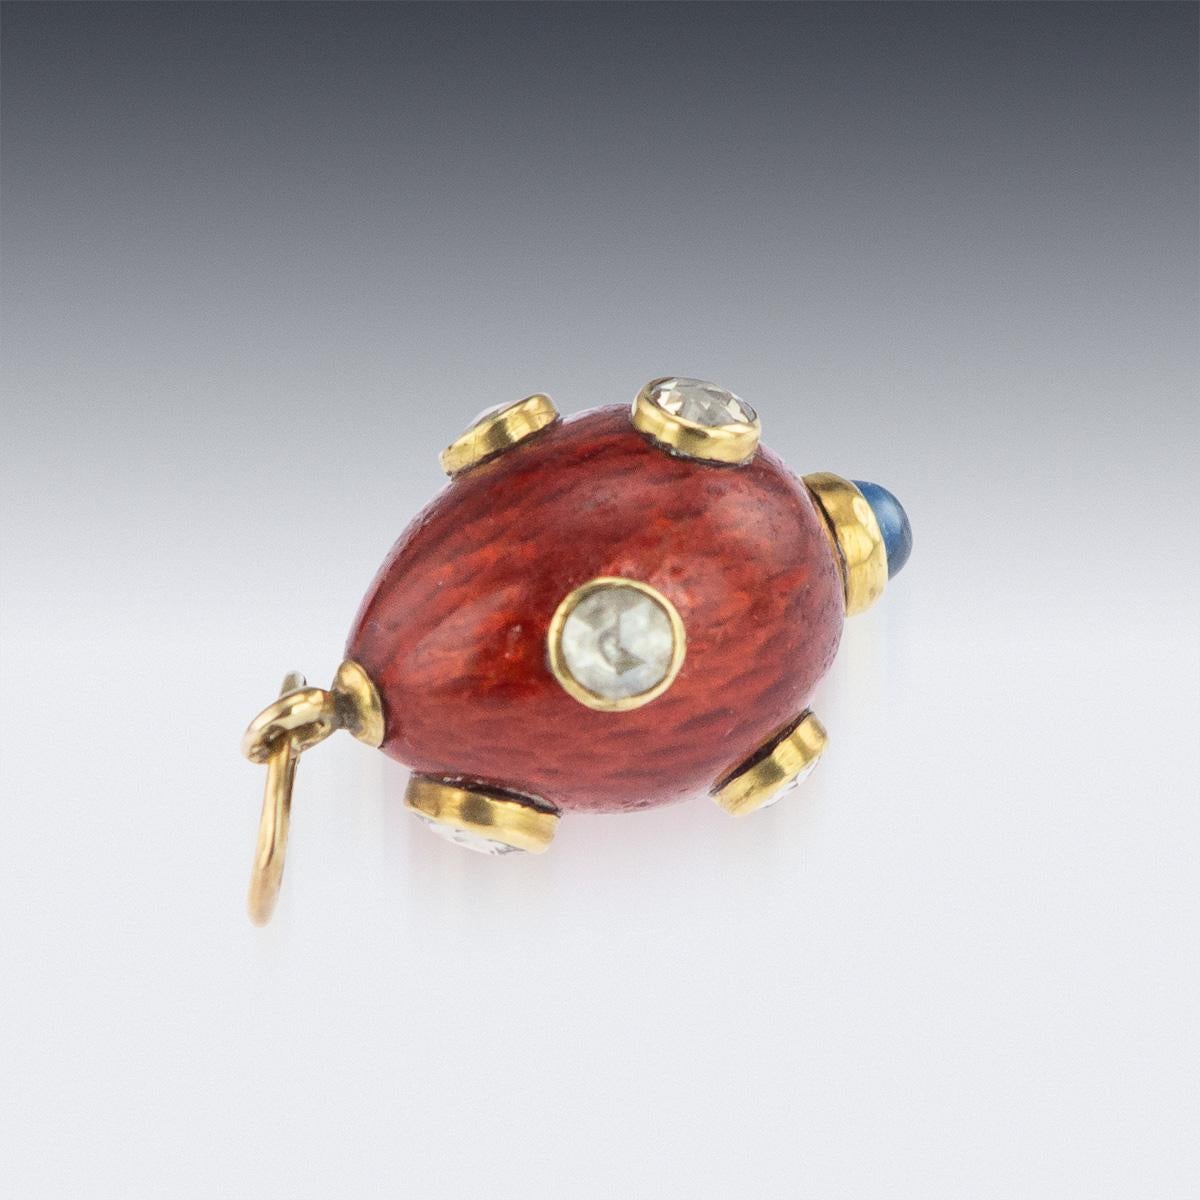 Russian Faberge Jewelled Gold and Guilloche Enamel Egg Pendant, circa 1900 1